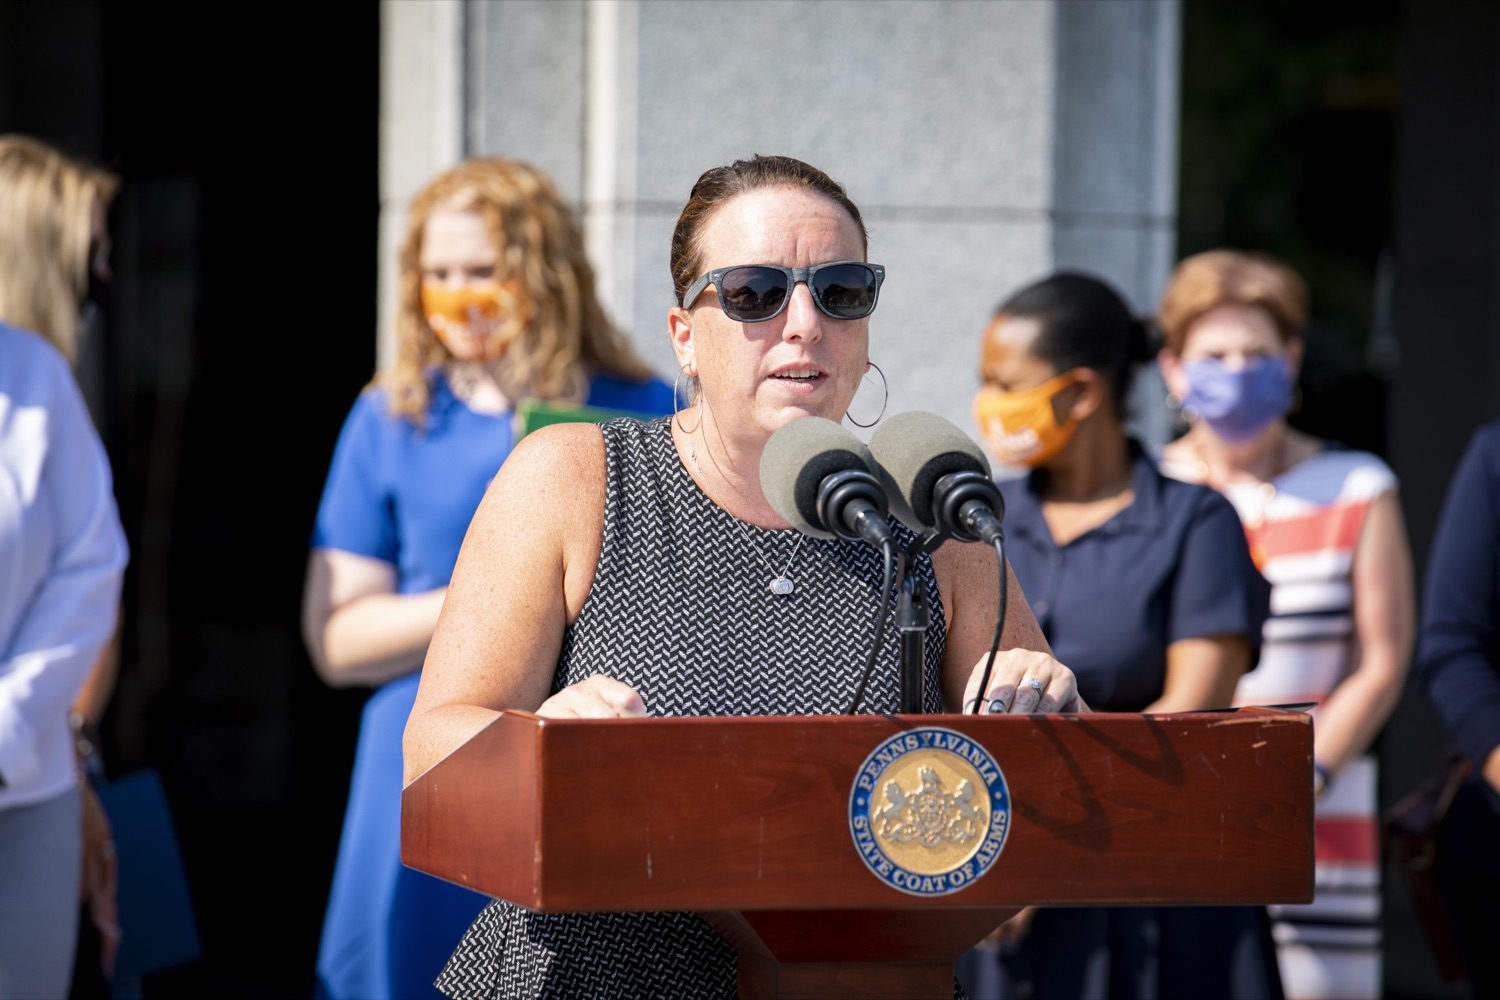 Meg Snead, Acting Secretary for the Department of Human Services, discusses how the pandemic has led to a rise in charitable food need, stresses the importance of addressing hunger in Pennsylvania, in Harrisburg, PA on September 15, 2021.<br><a href="https://filesource.amperwave.net/commonwealthofpa/photo/19104_dhs_hungerAction_cz_09.JPG" target="_blank">⇣ Download Photo</a>